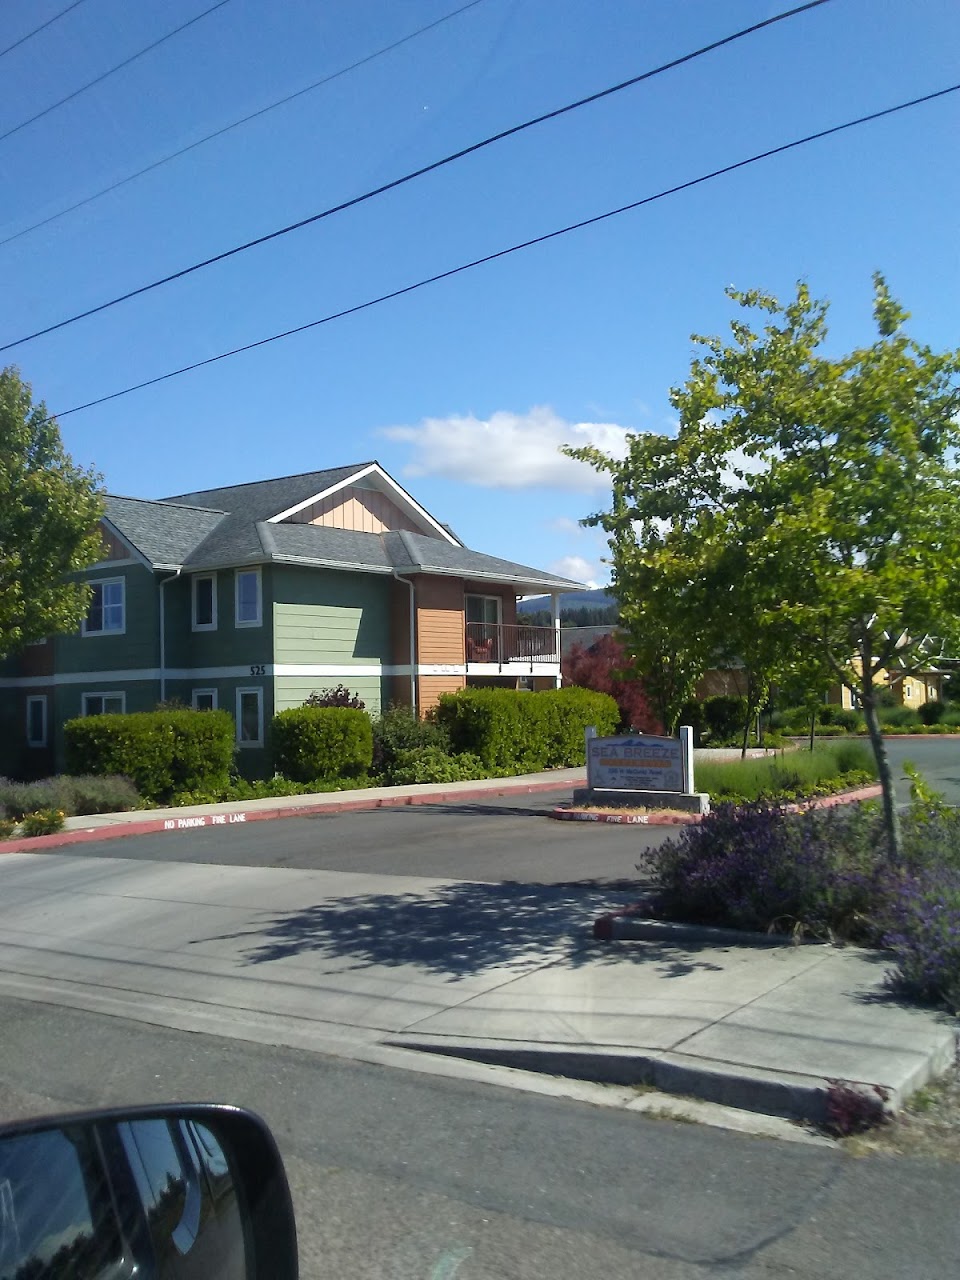 Photo of SEA BREEZE APTS. Affordable housing located at 525 MCCURDY RD SEQUIM, WA 98382